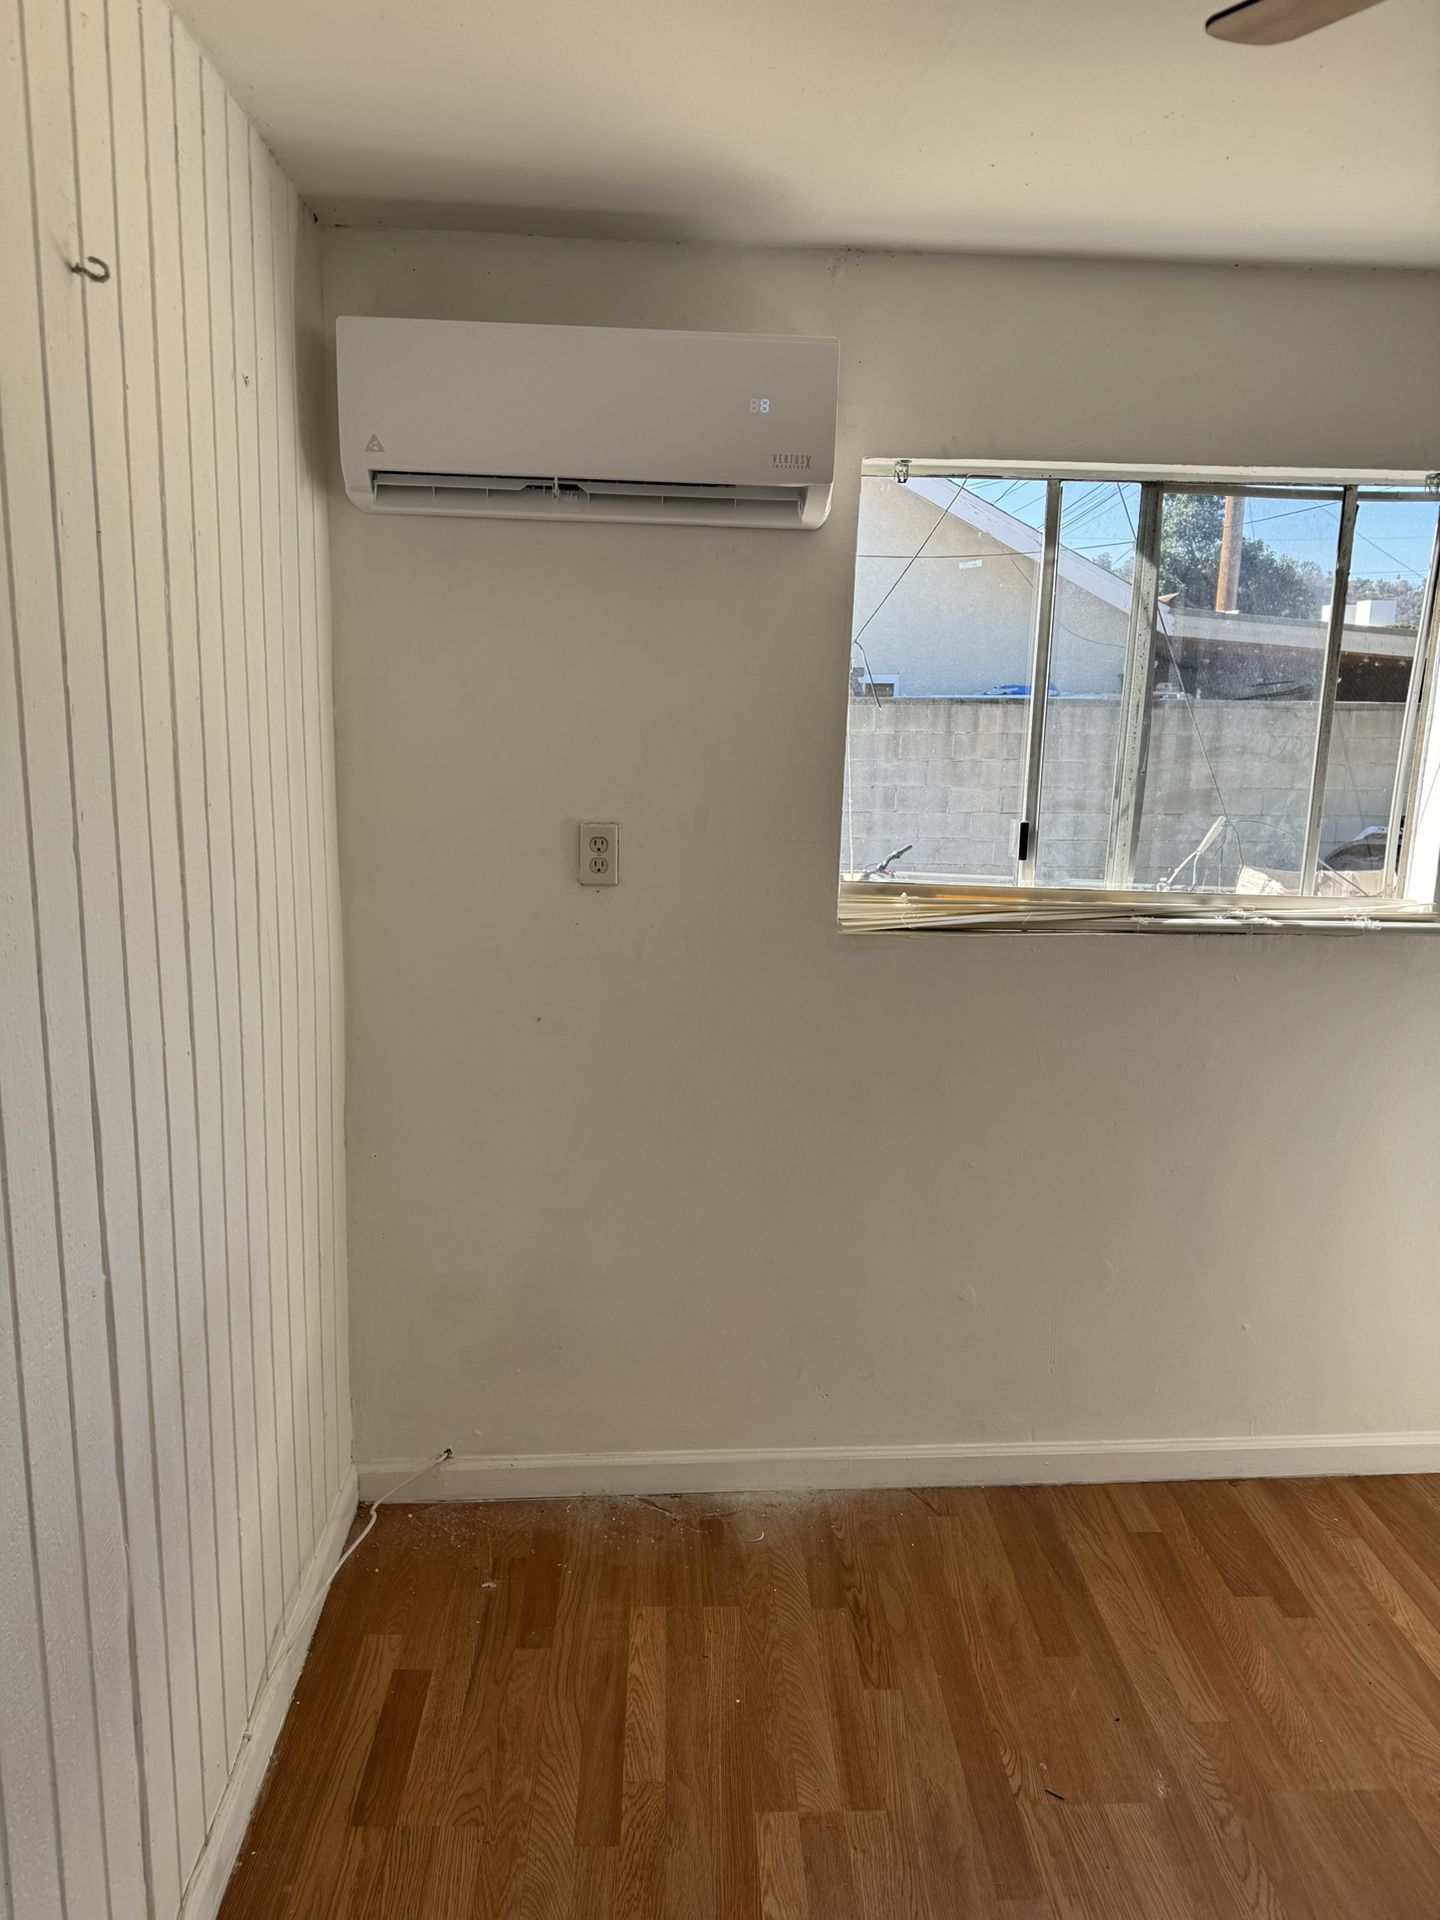 Mini Split  Ductless Ac and Heater